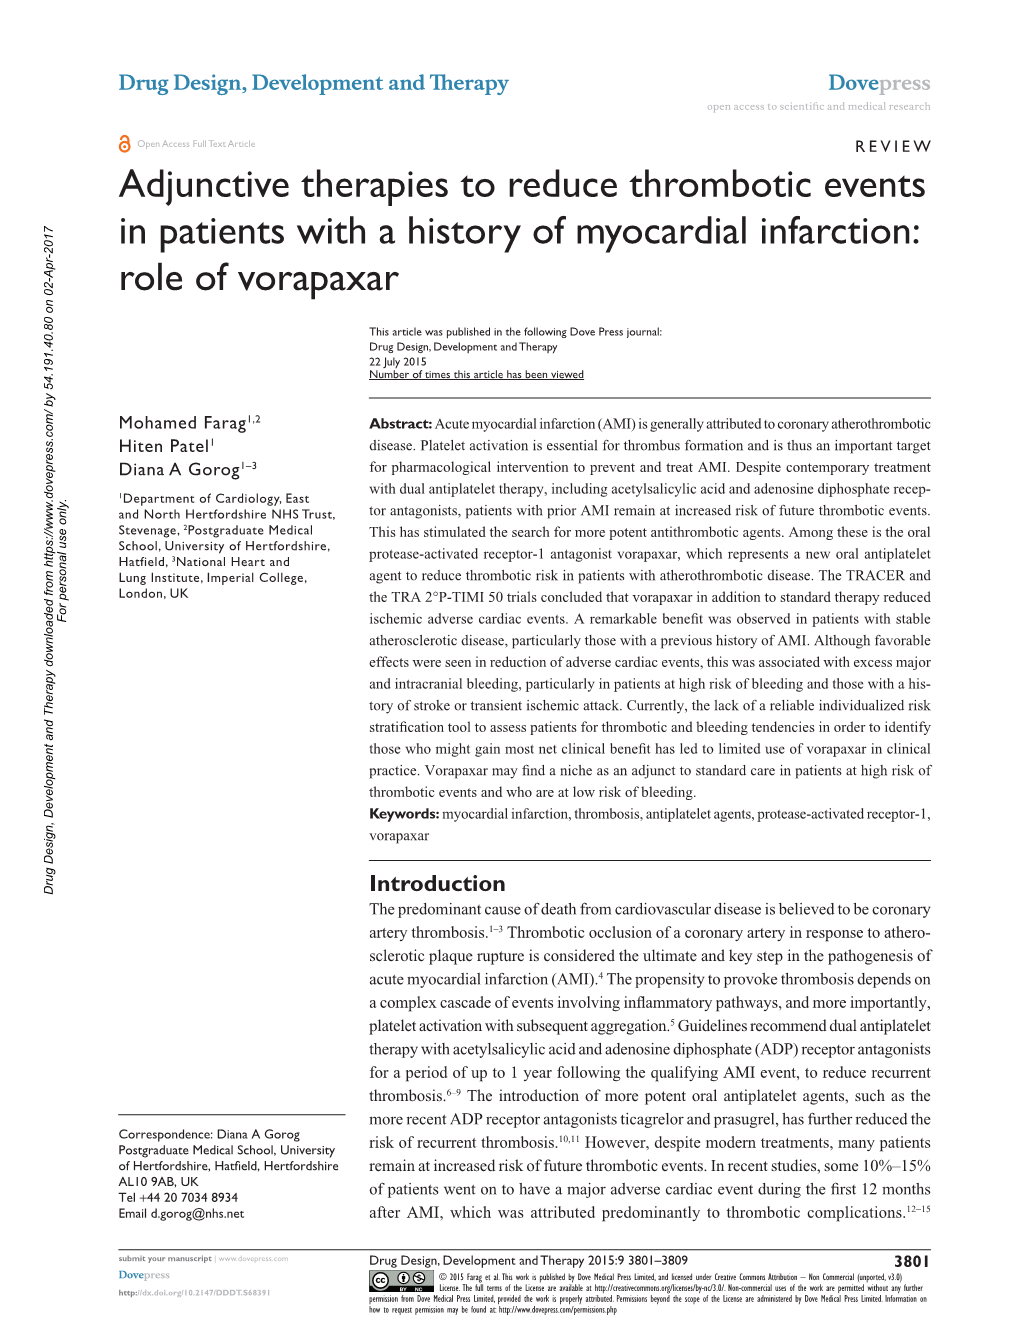 Adjunctive Therapies to Reduce Thrombotic Events in Patients with a History of Myocardial Infarction: Role of Vorapaxar